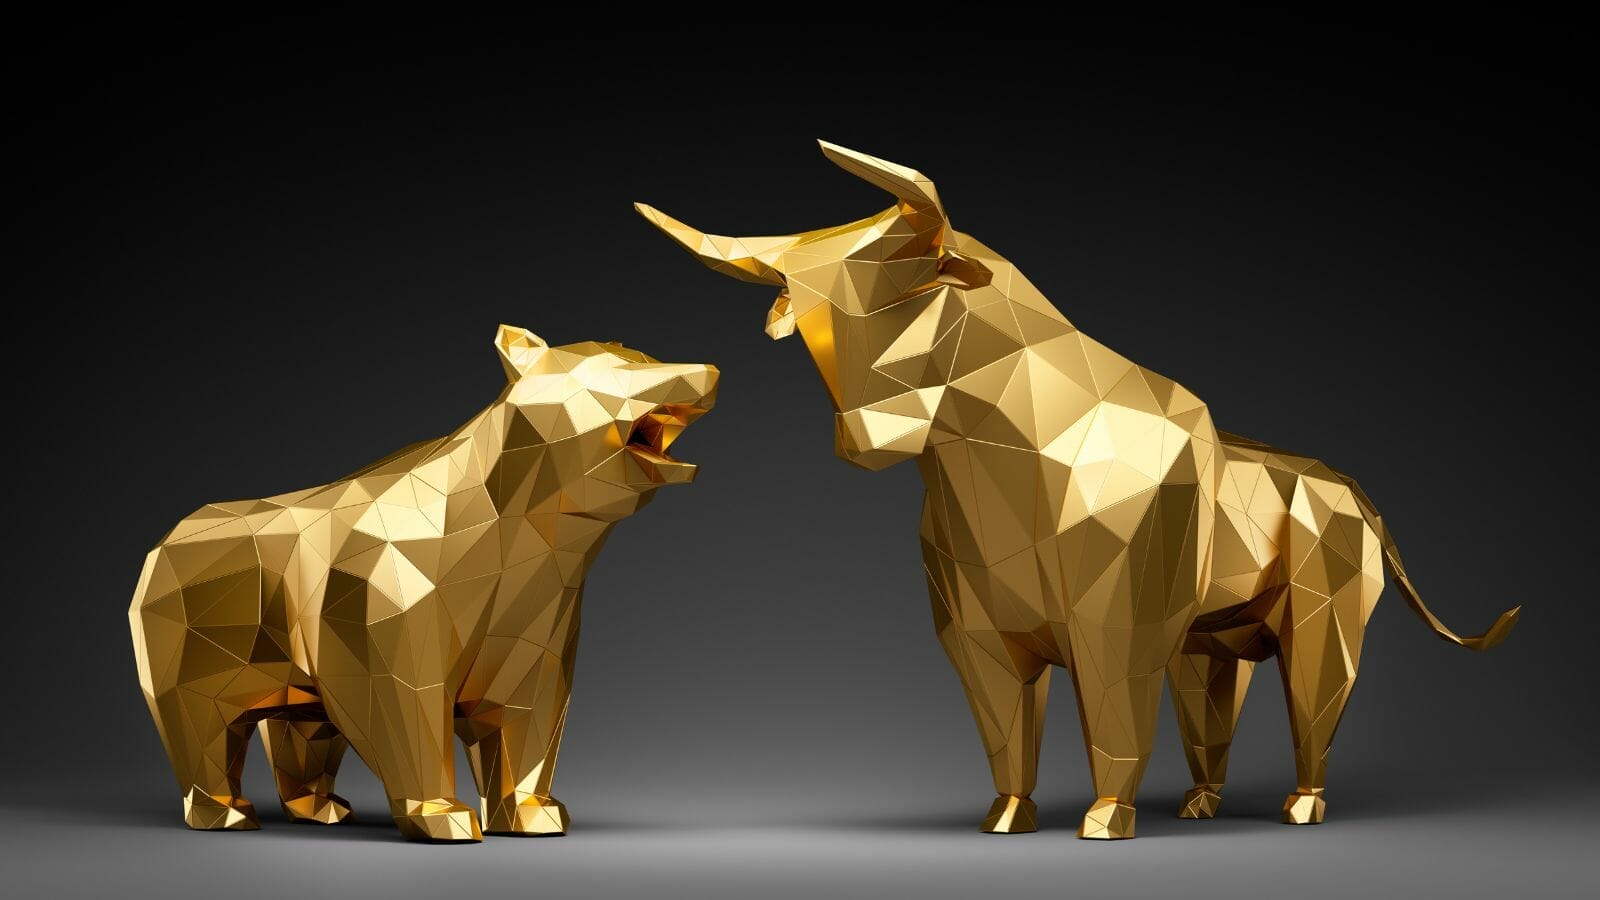 A gold bull and bear statues

